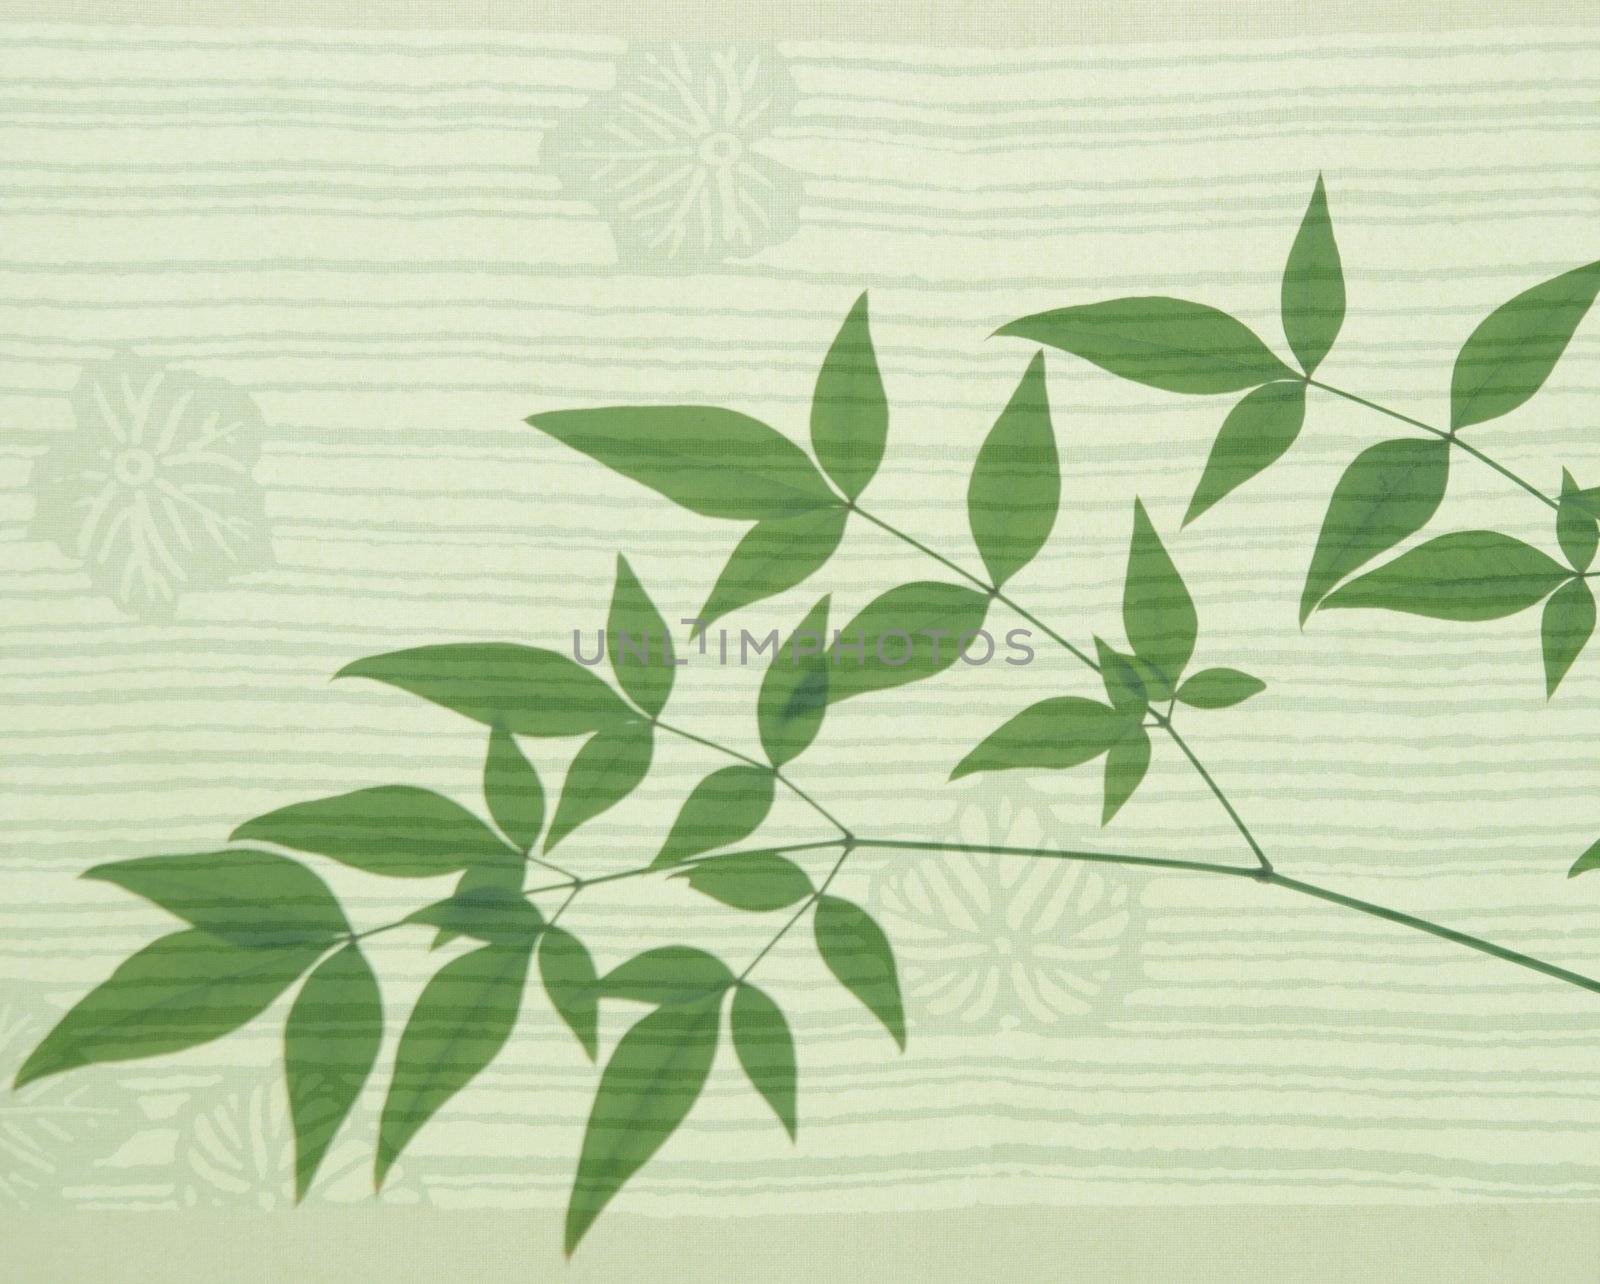 heavenly bamboo on an Asian leaf motif background